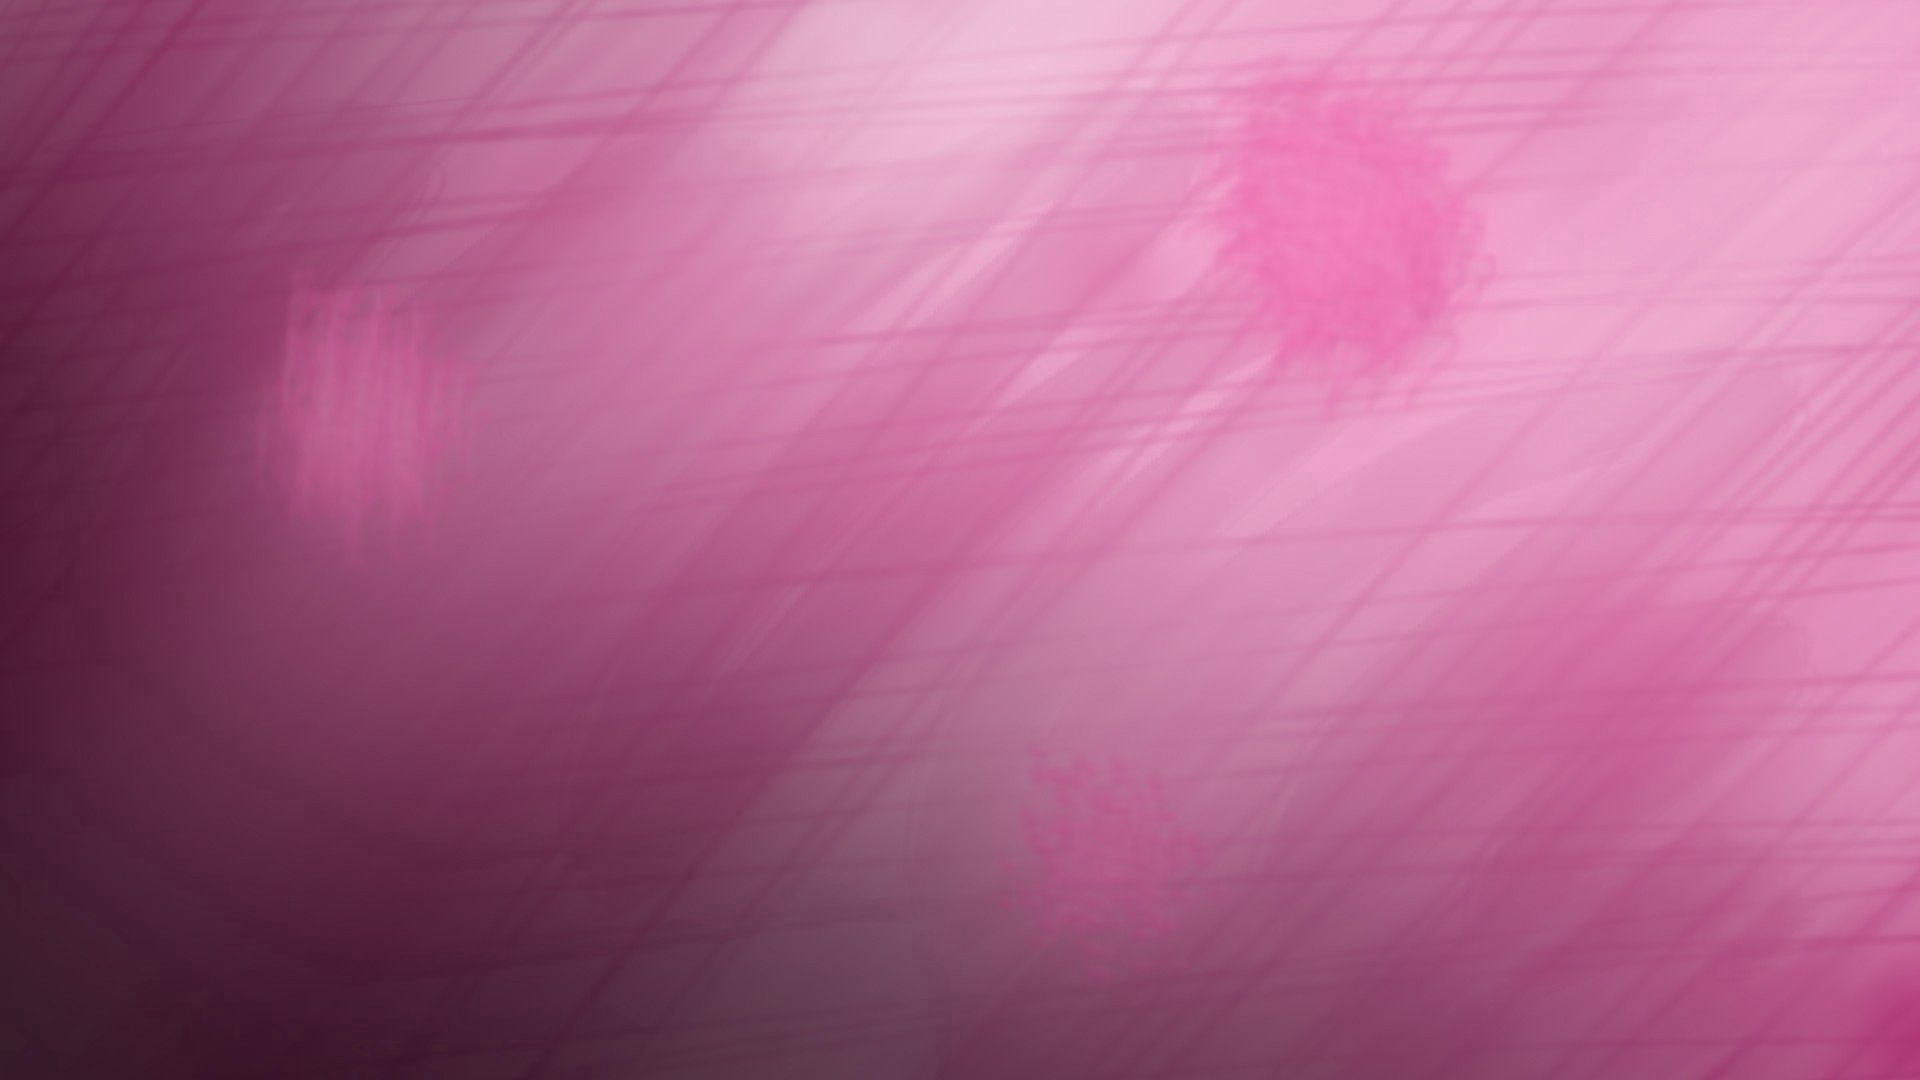 abstract, pink, bright, lines, stains, spots Image for desktop